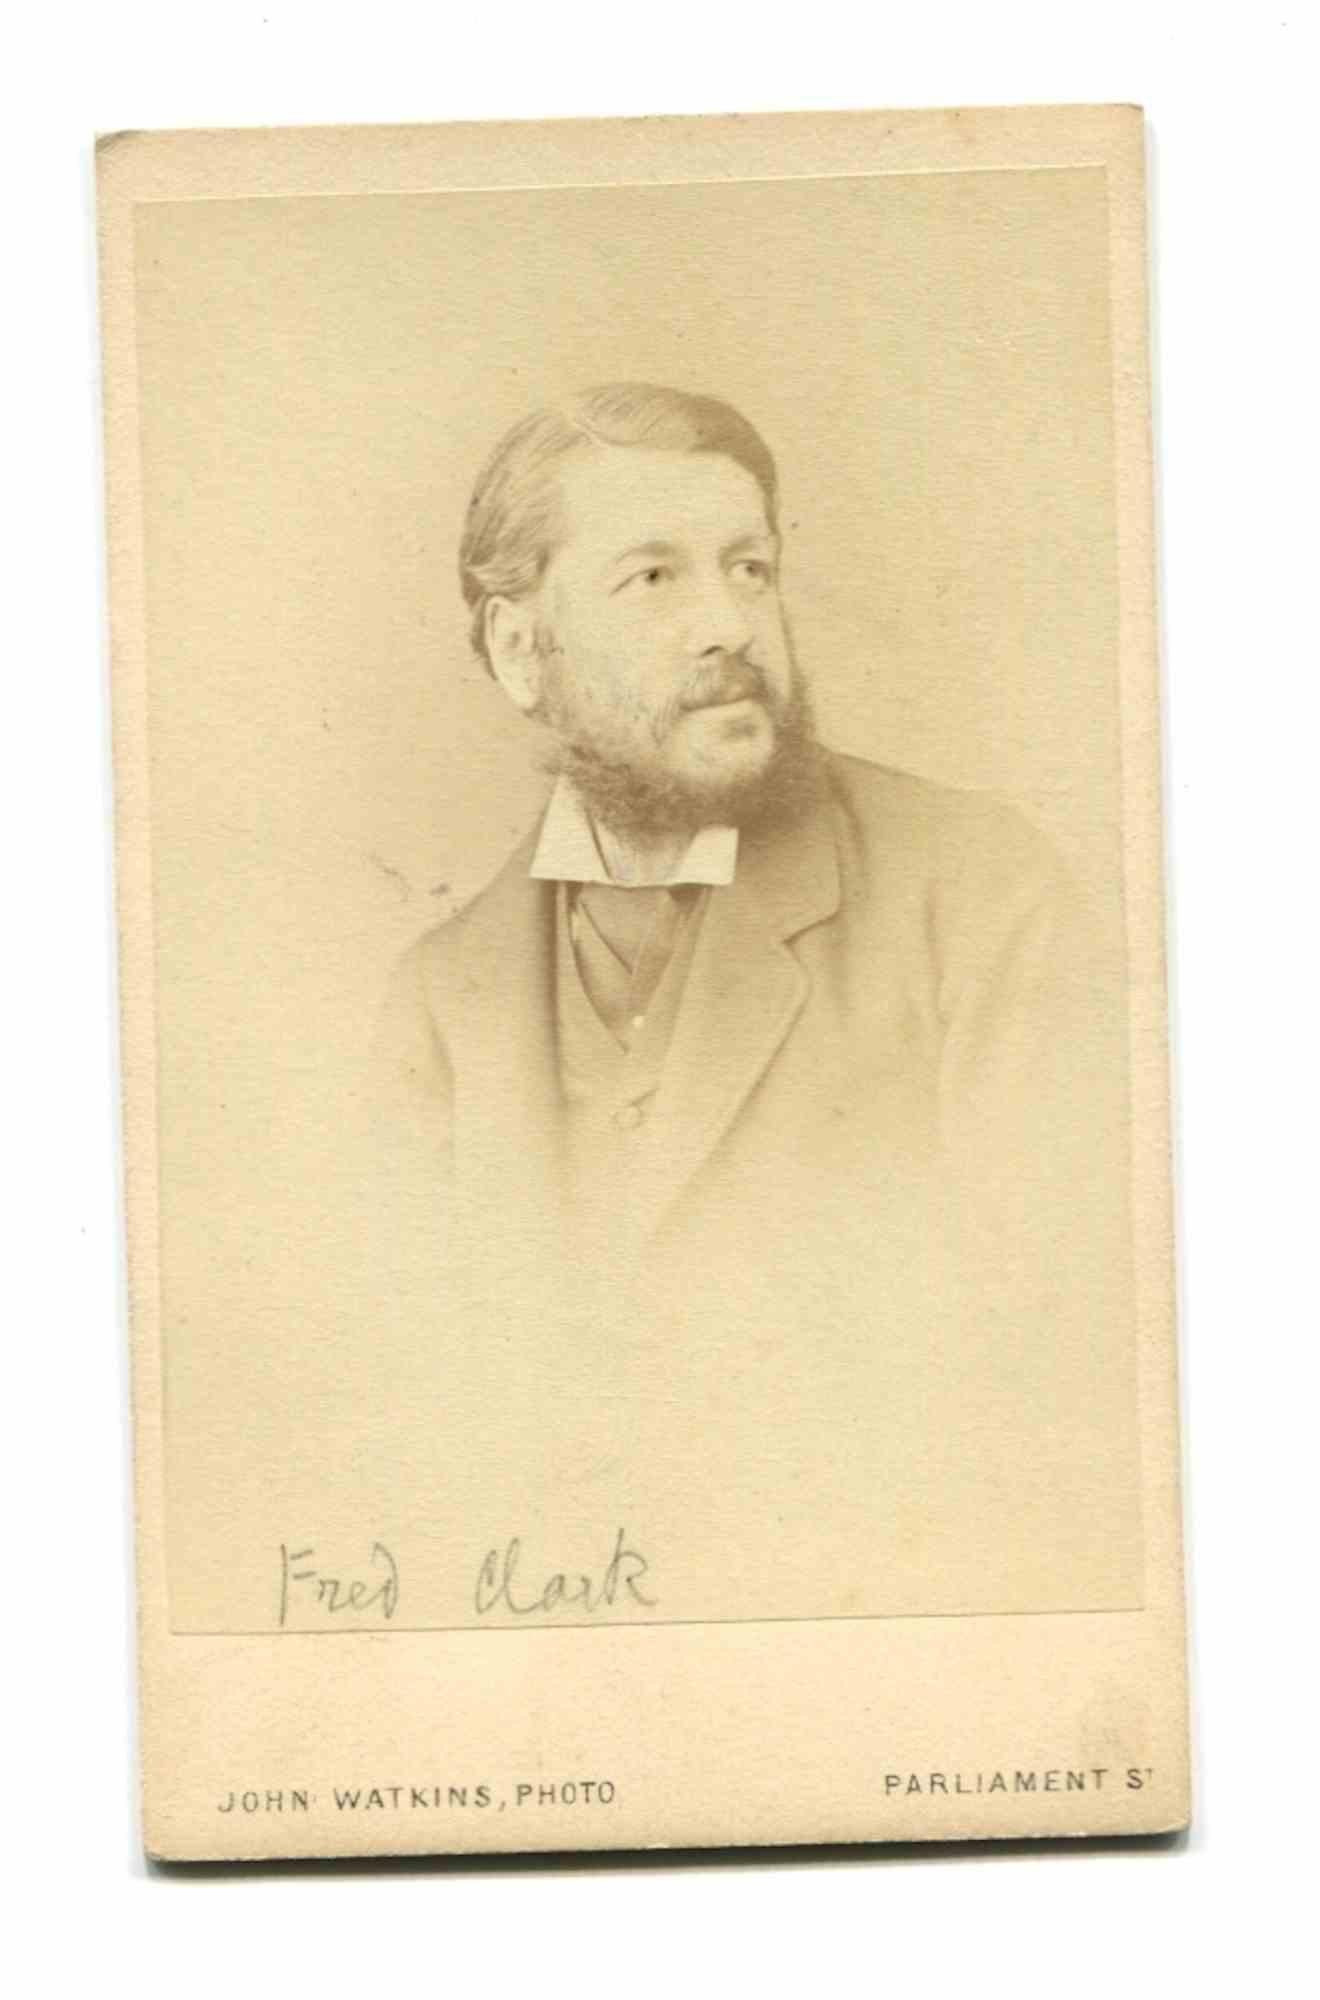 Unknown Figurative Photograph - Historical Photo - Portrait  of Fred Clark - Vintage Photo - 19th Century 